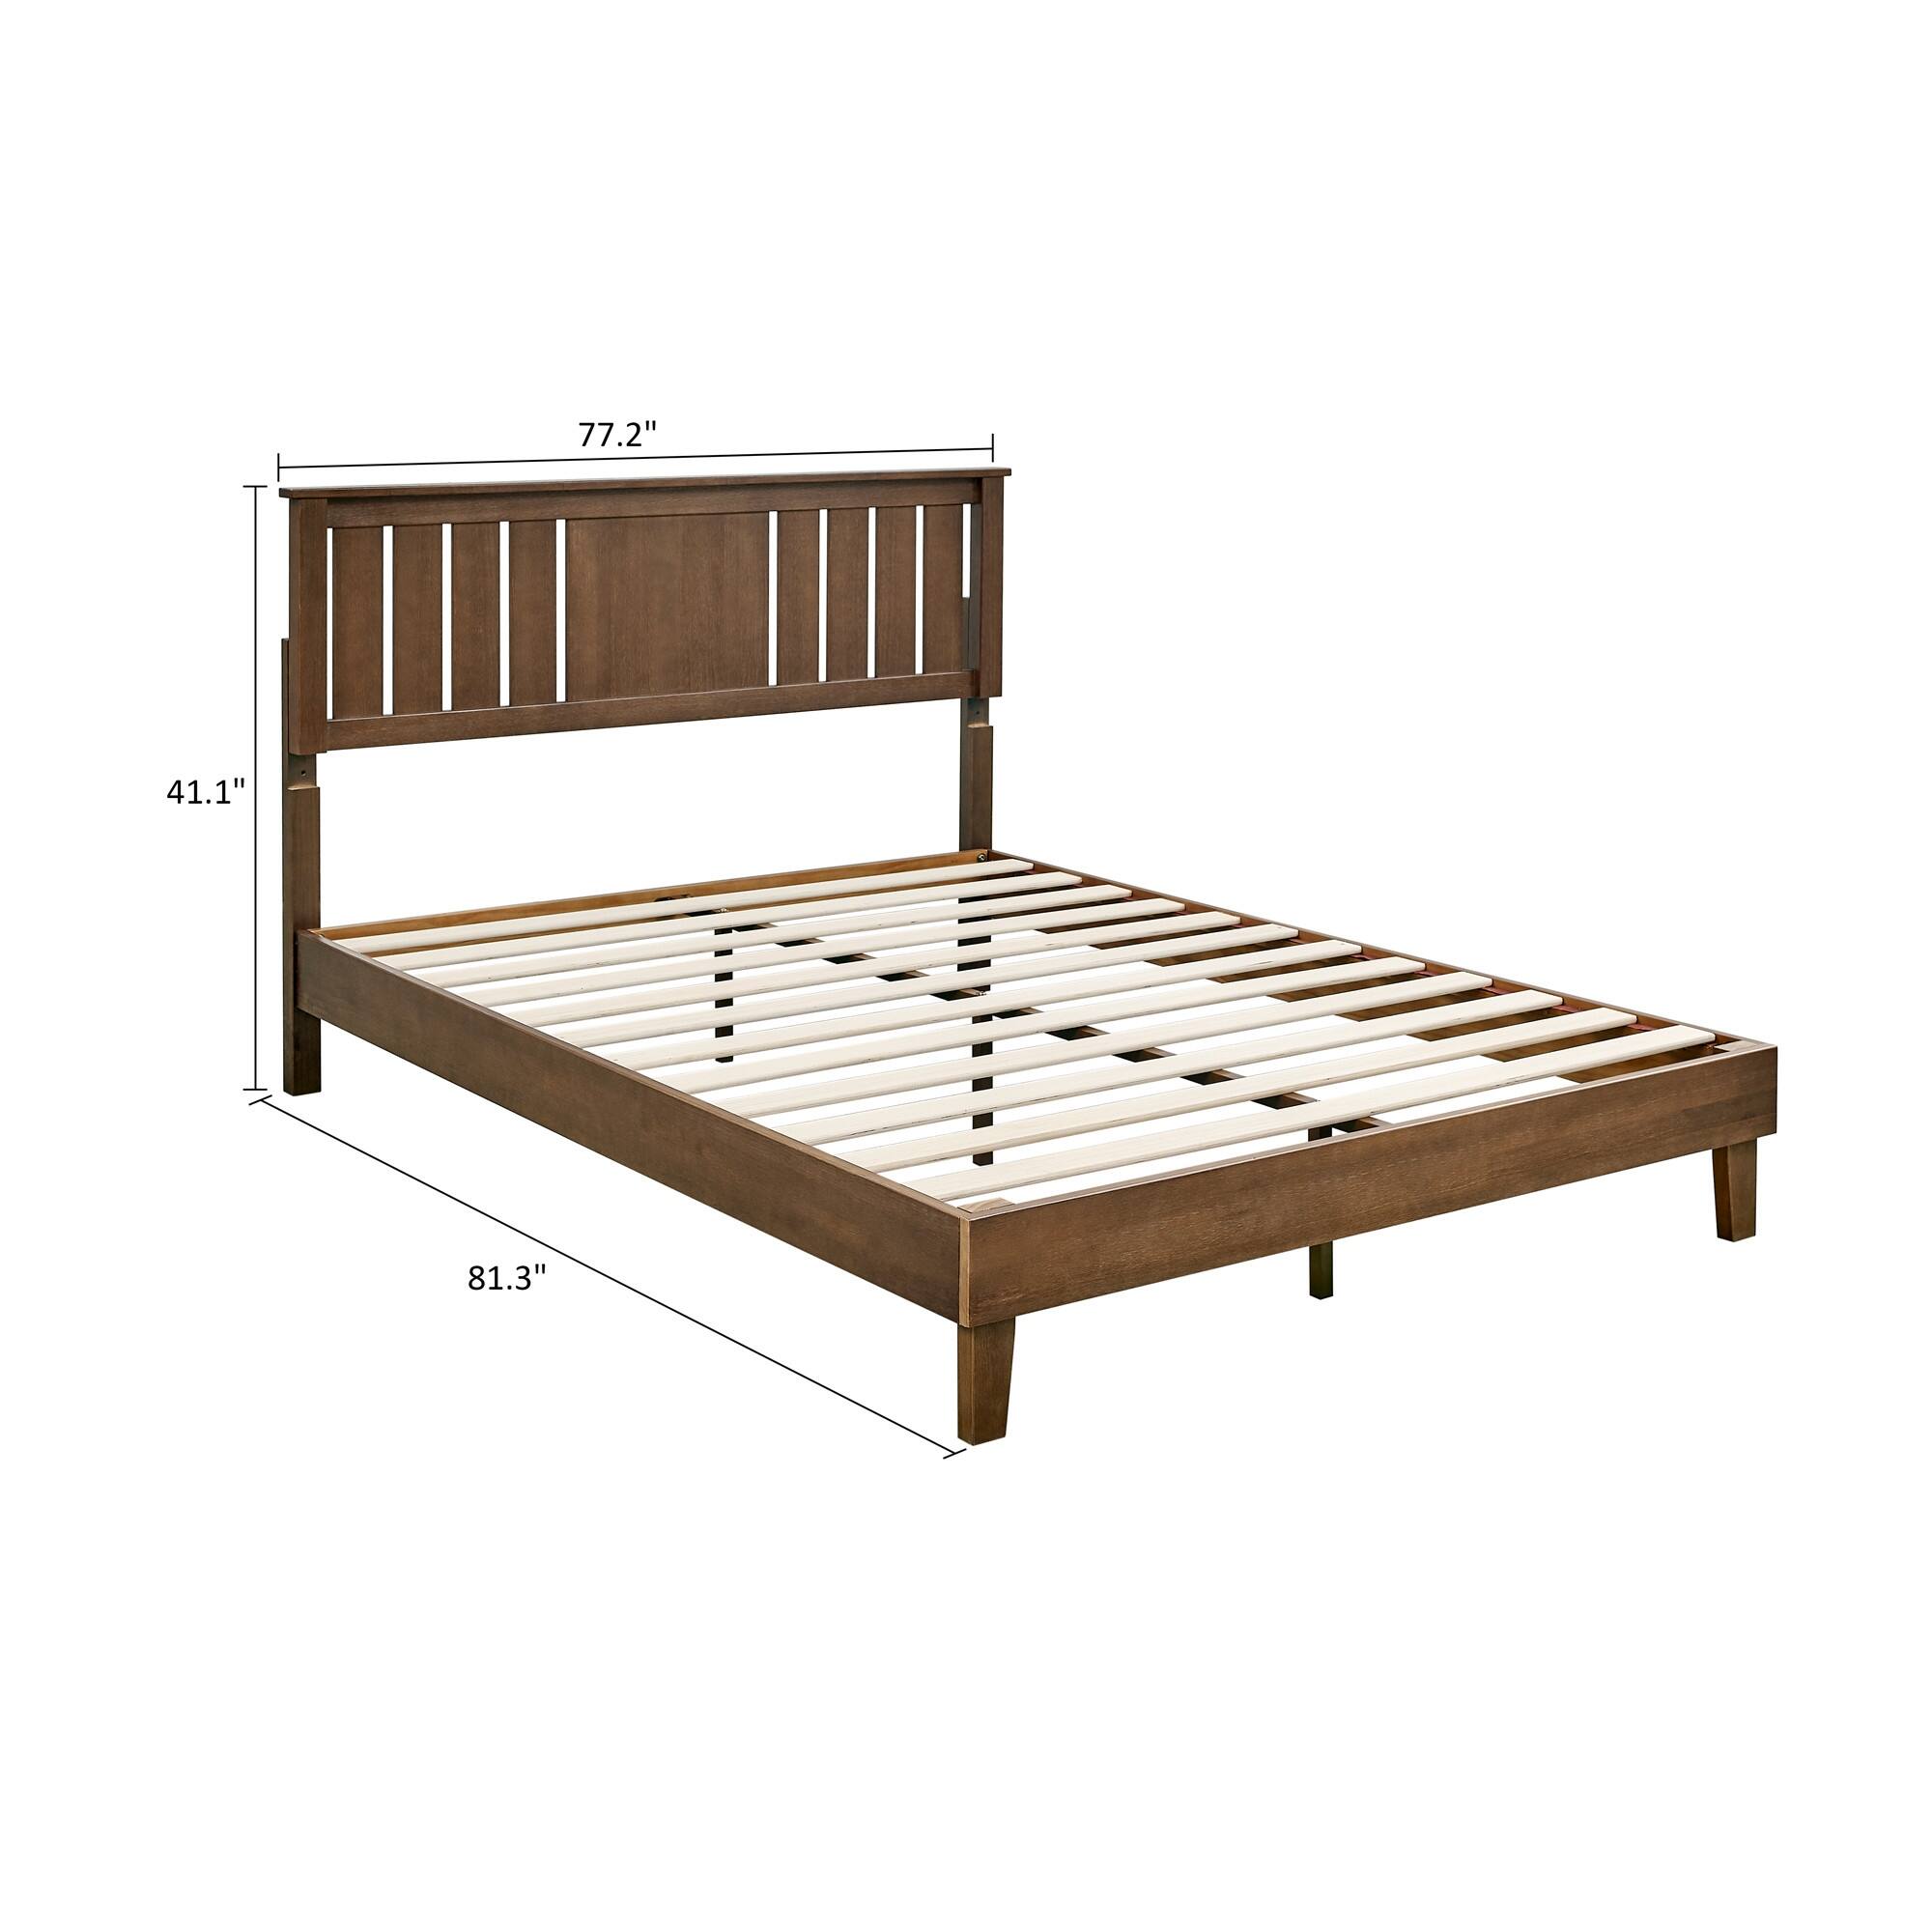 MUSEHOMEINC Mid-Century Modern Solid Wooden Platform Bed with ...